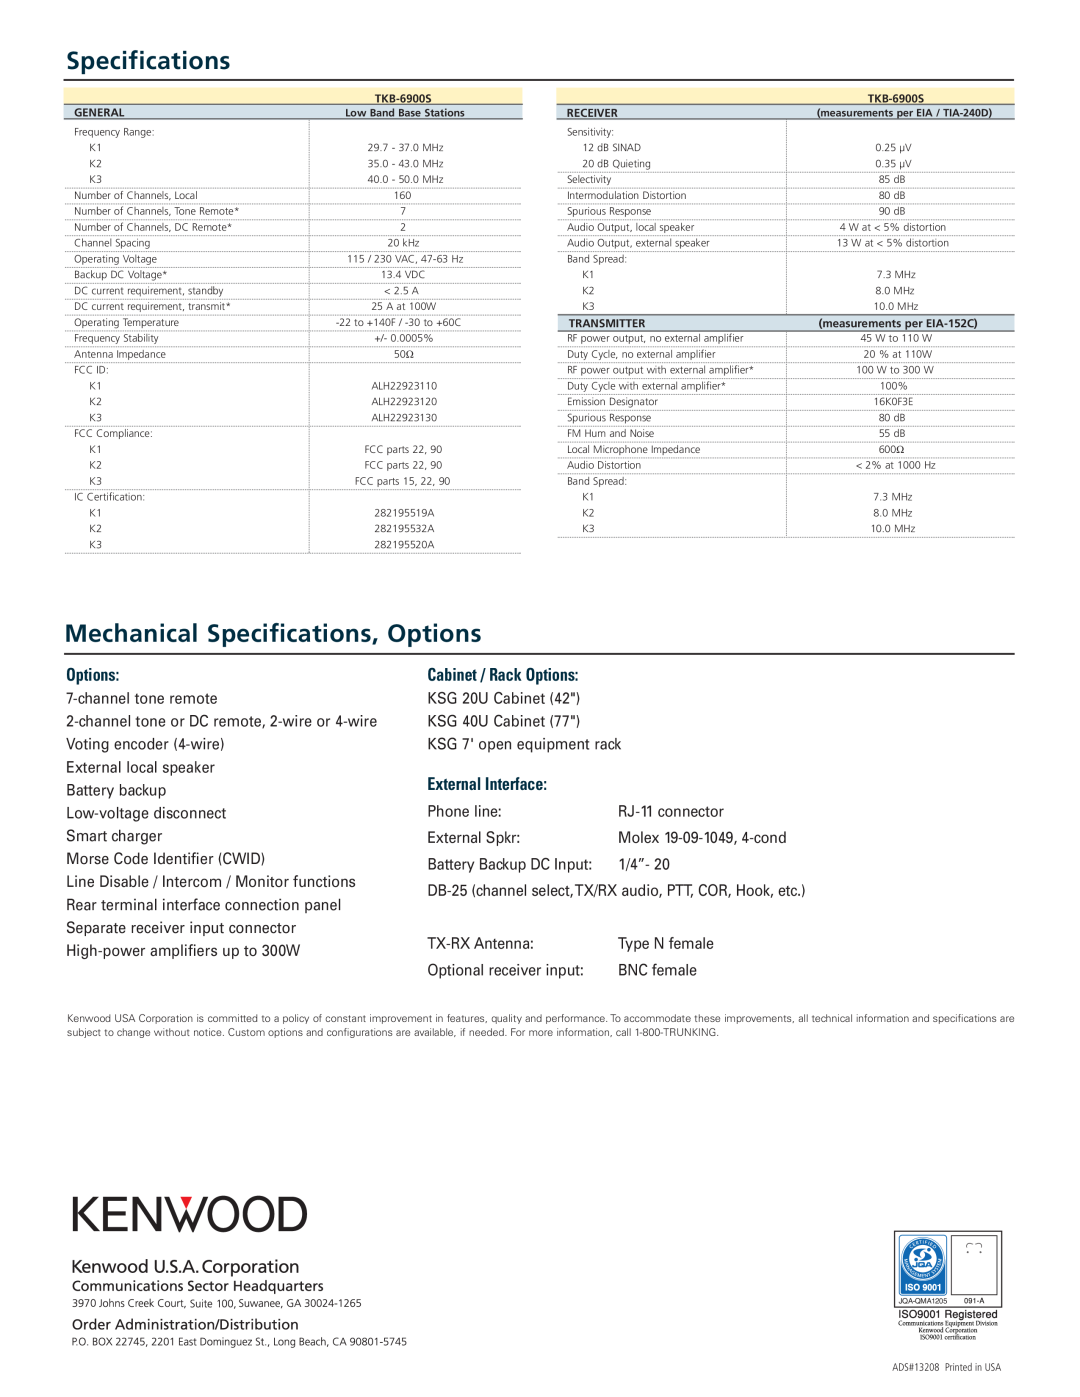 Kenwood TKB-6900S manual Mechanical Specifications, Options, Cabinet / Rack Options, External Interface 